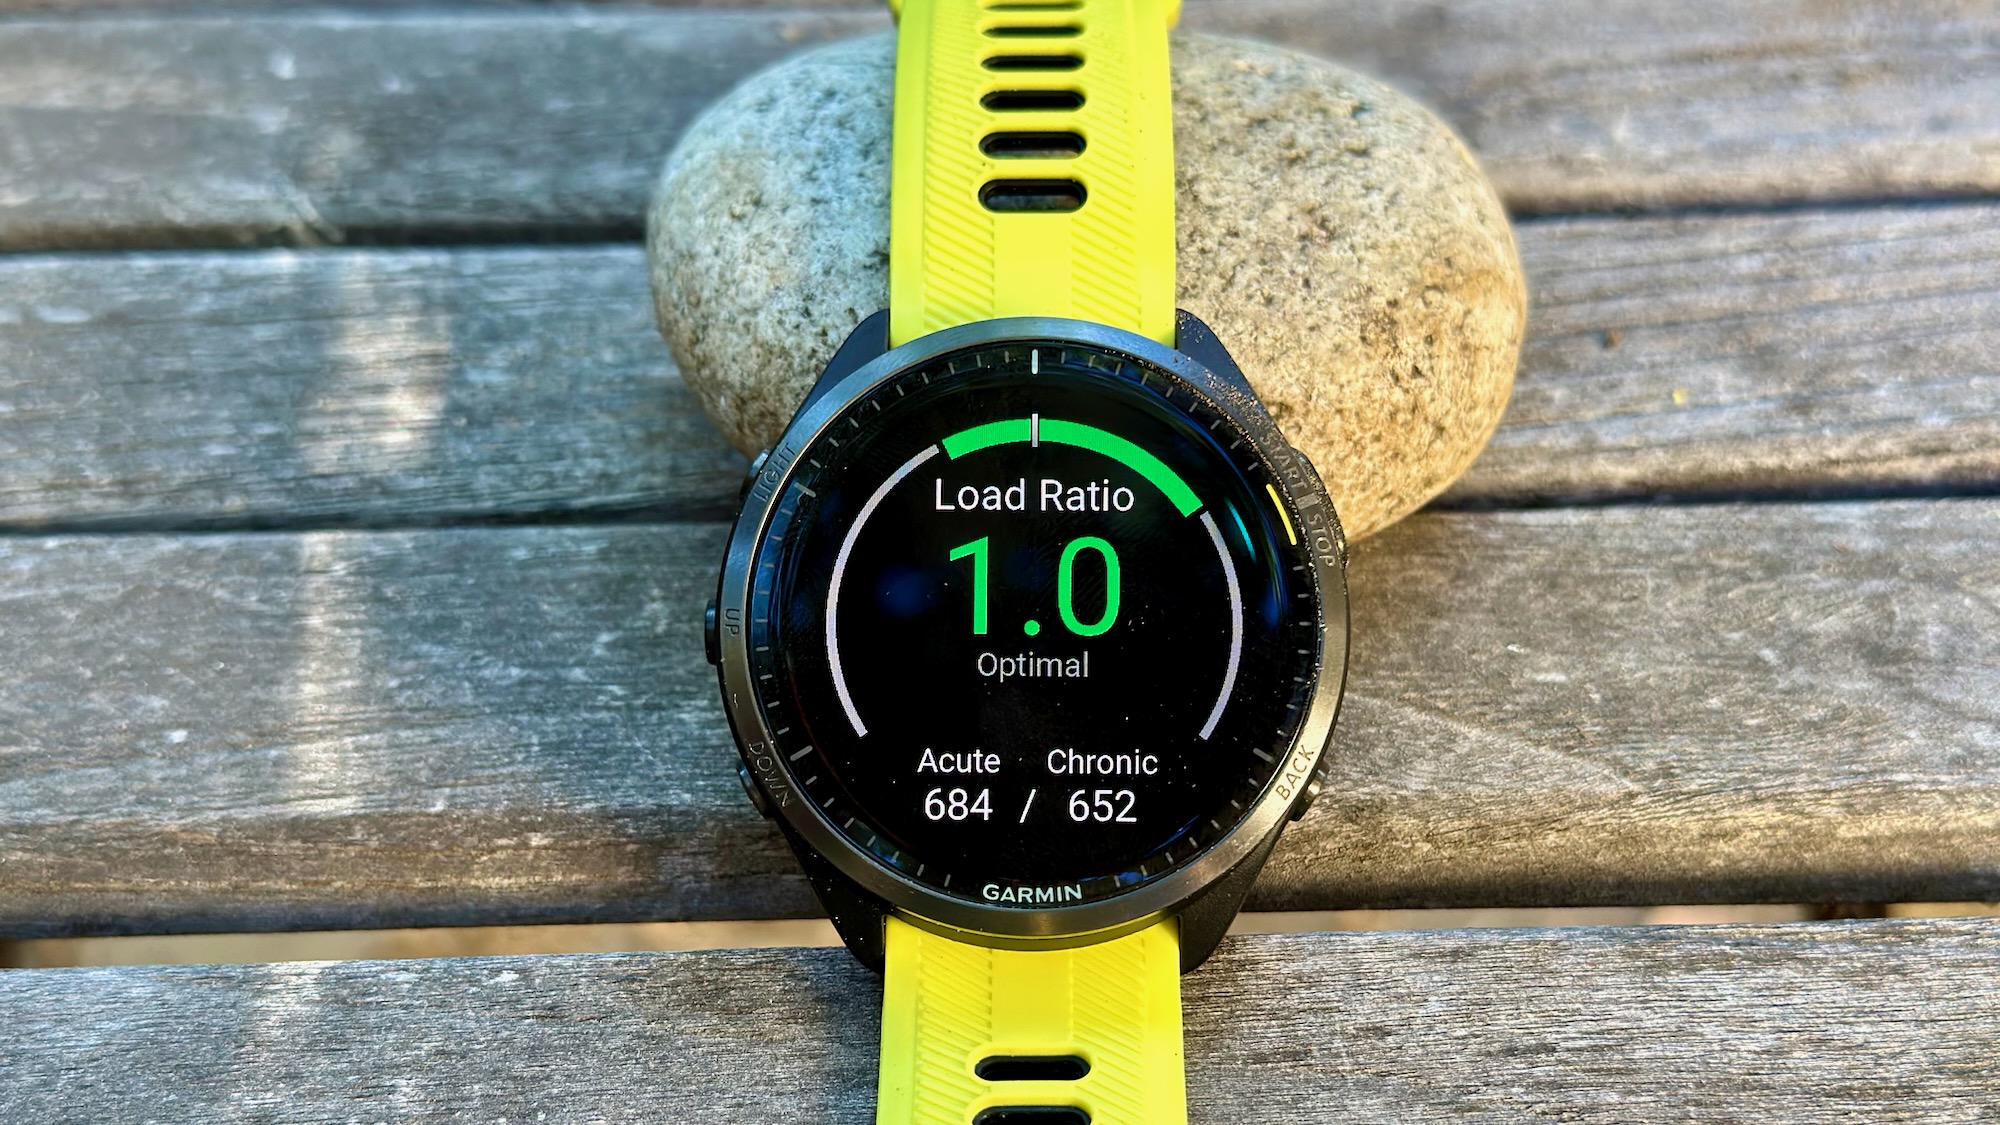 The author's training load ratio on the Garmin Forerunner 965